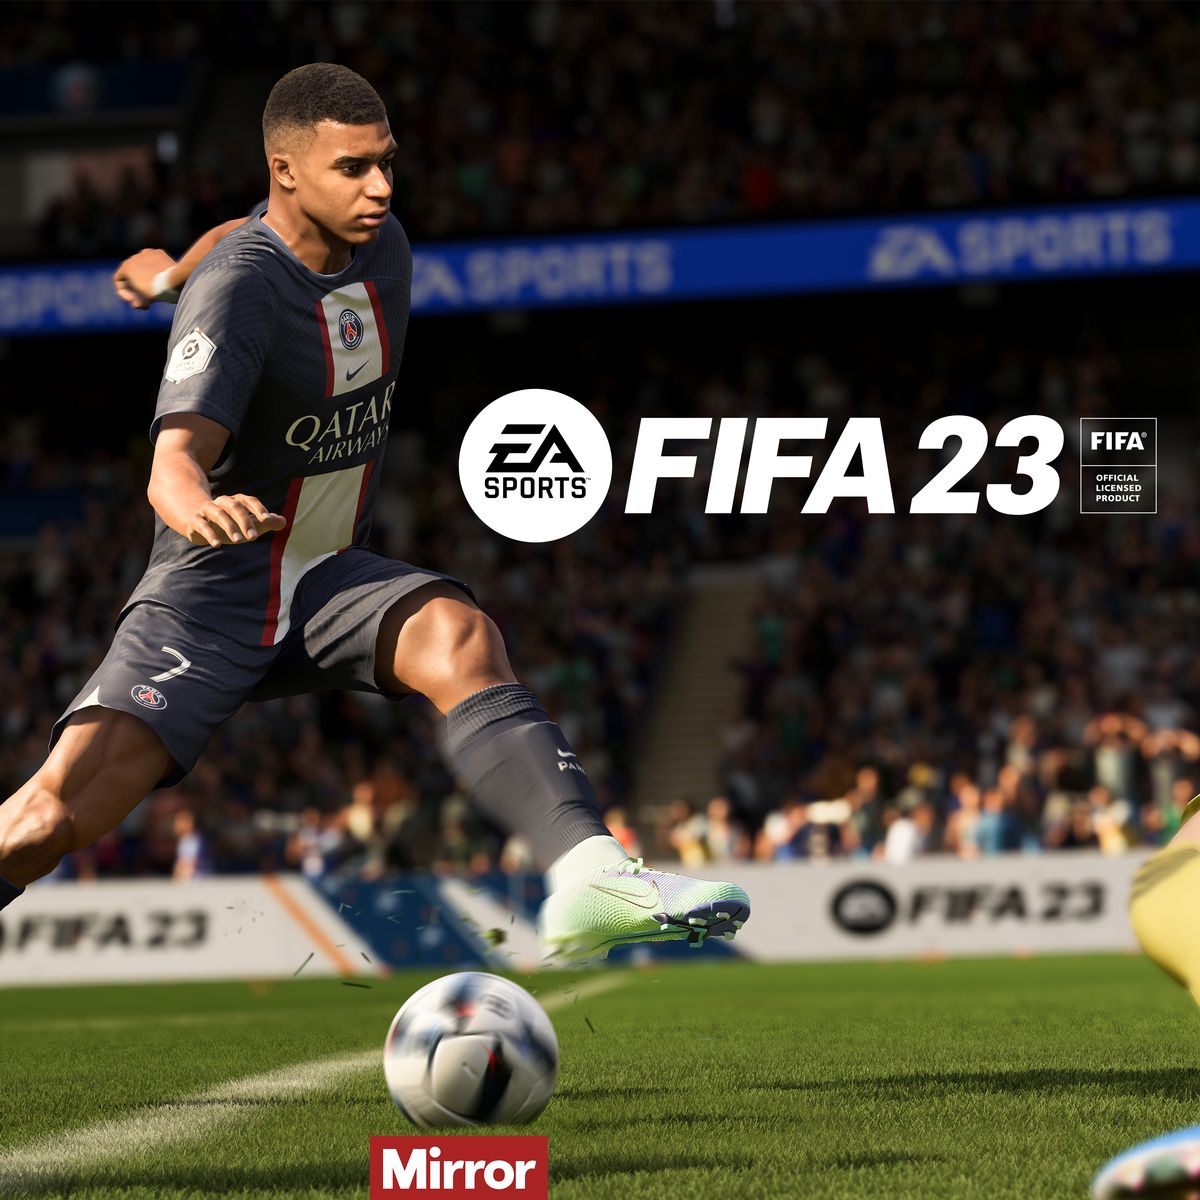 FIFA 23 new features include gameplay changes, FUT updates and women's football